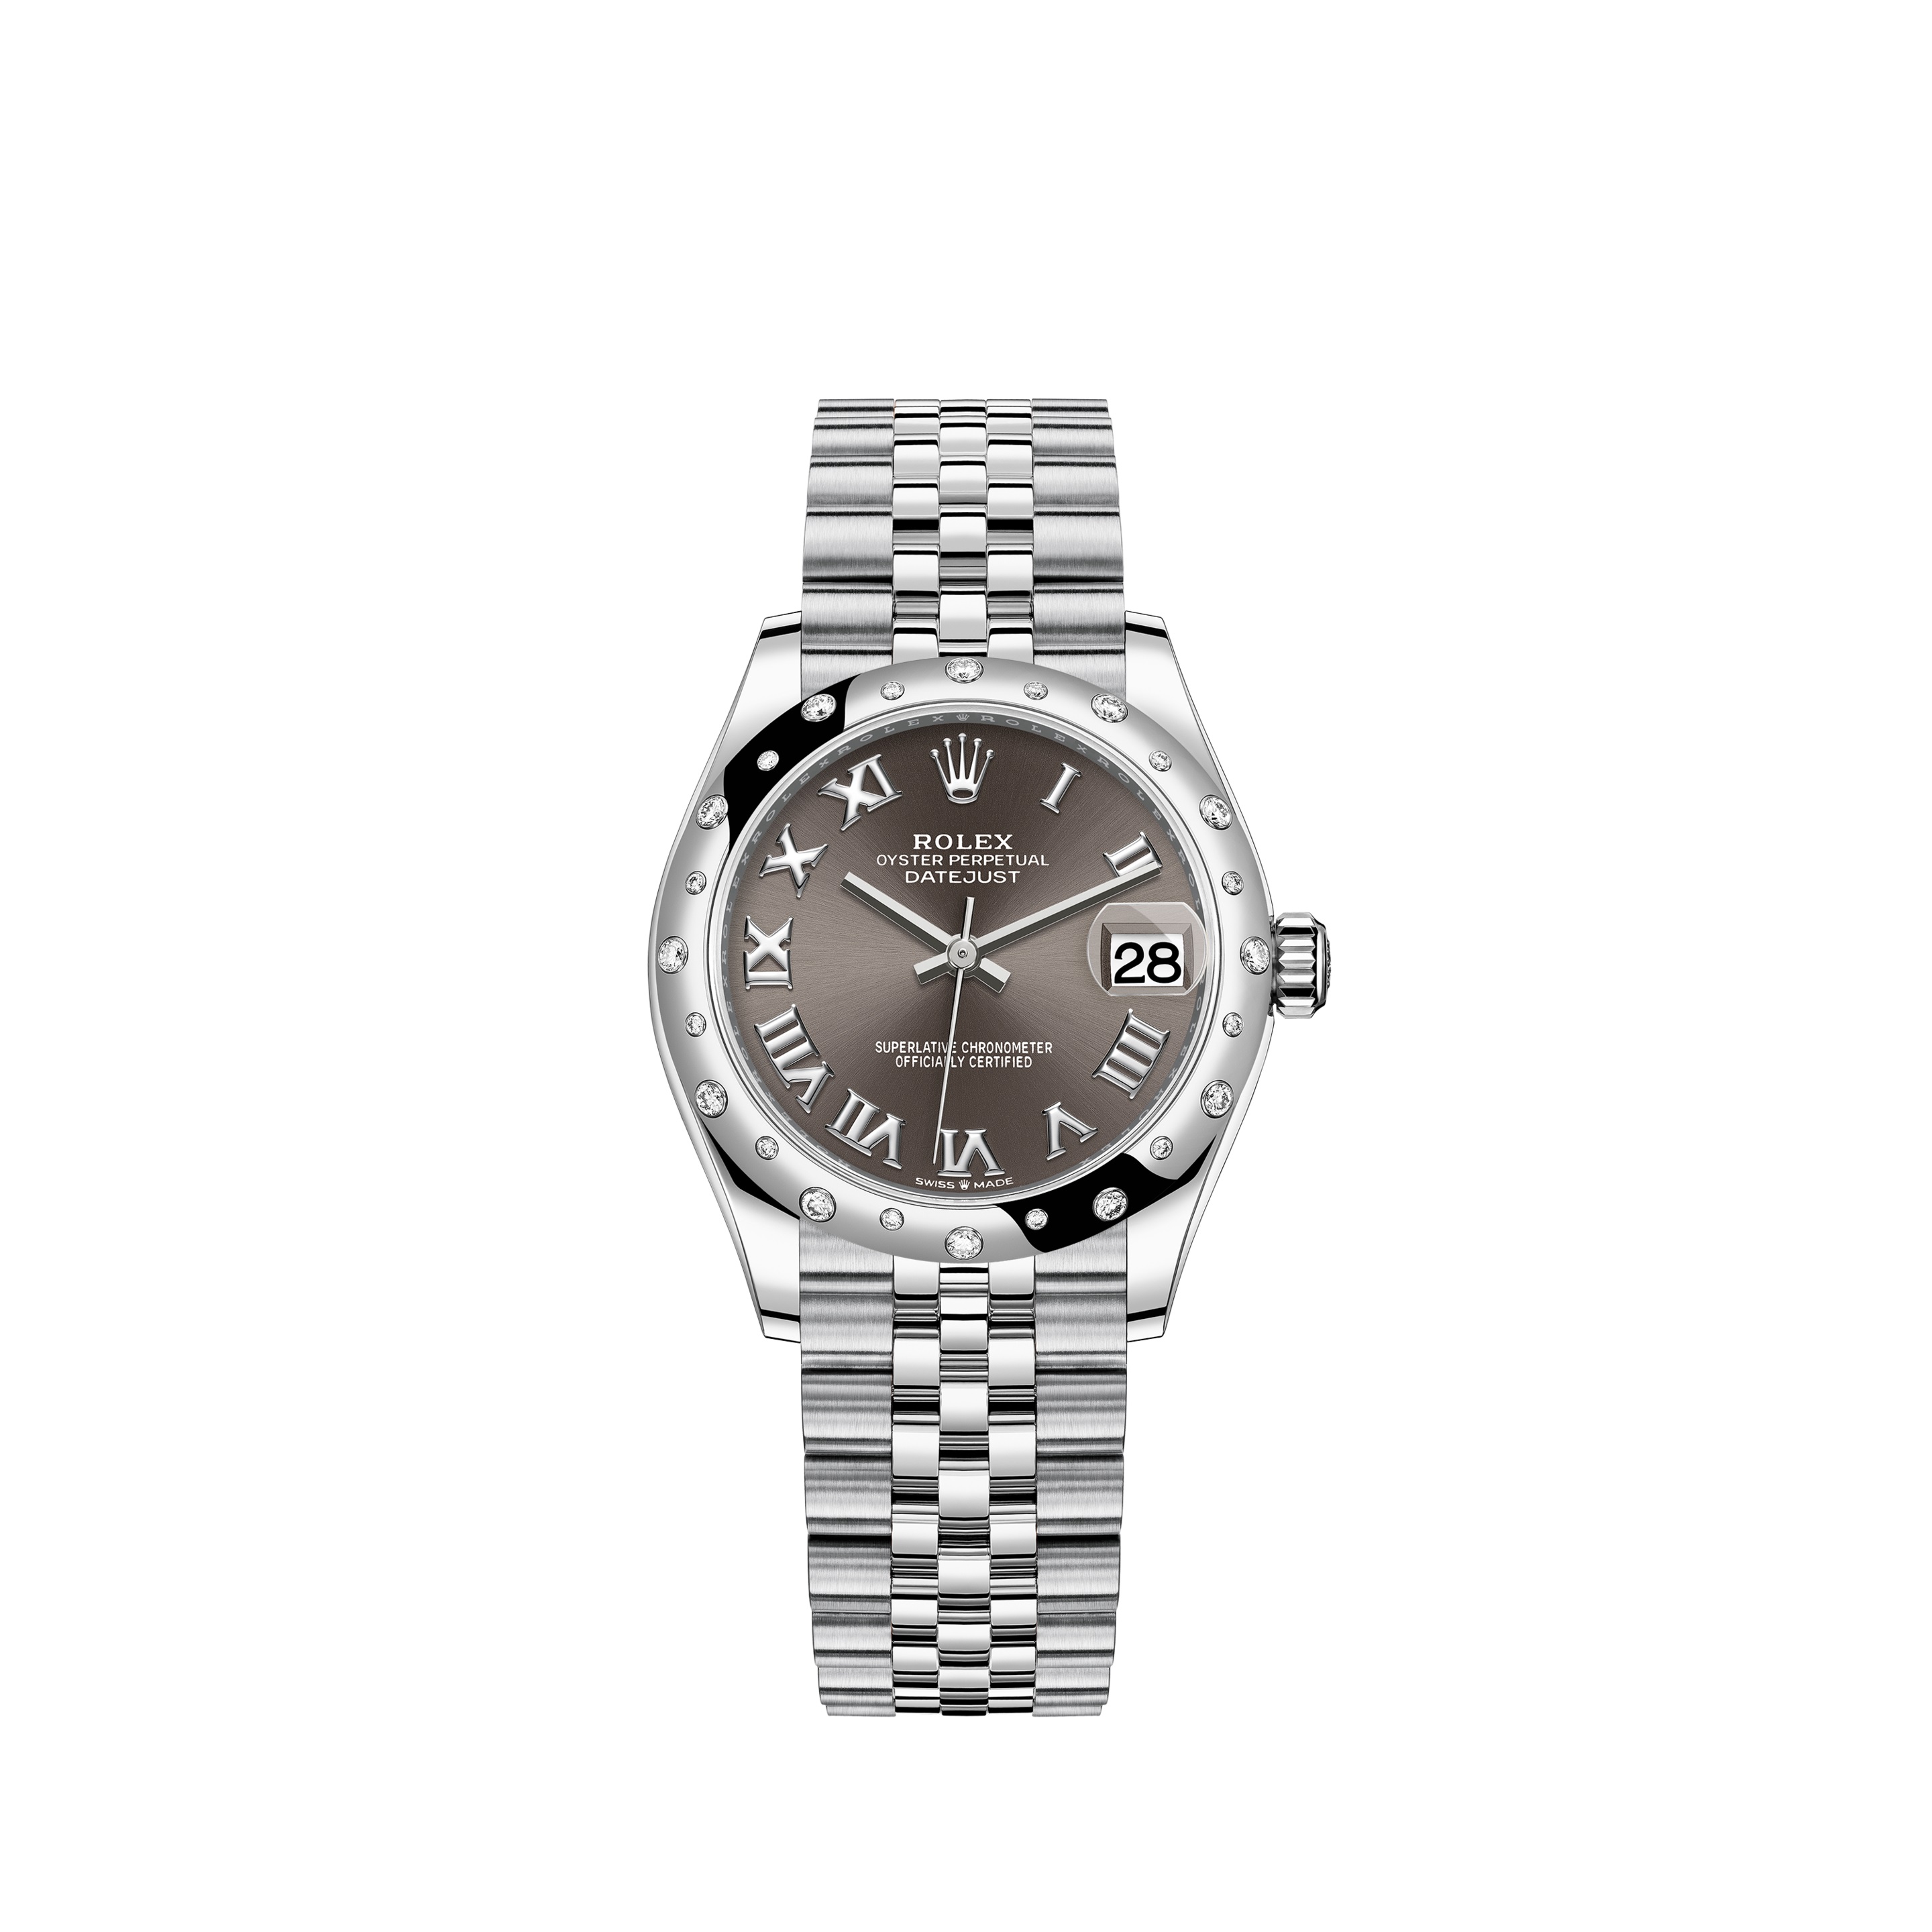 Datejust 31 278344RBR White Gold & Stainless Steel Watch (Dark Grey) - Click Image to Close